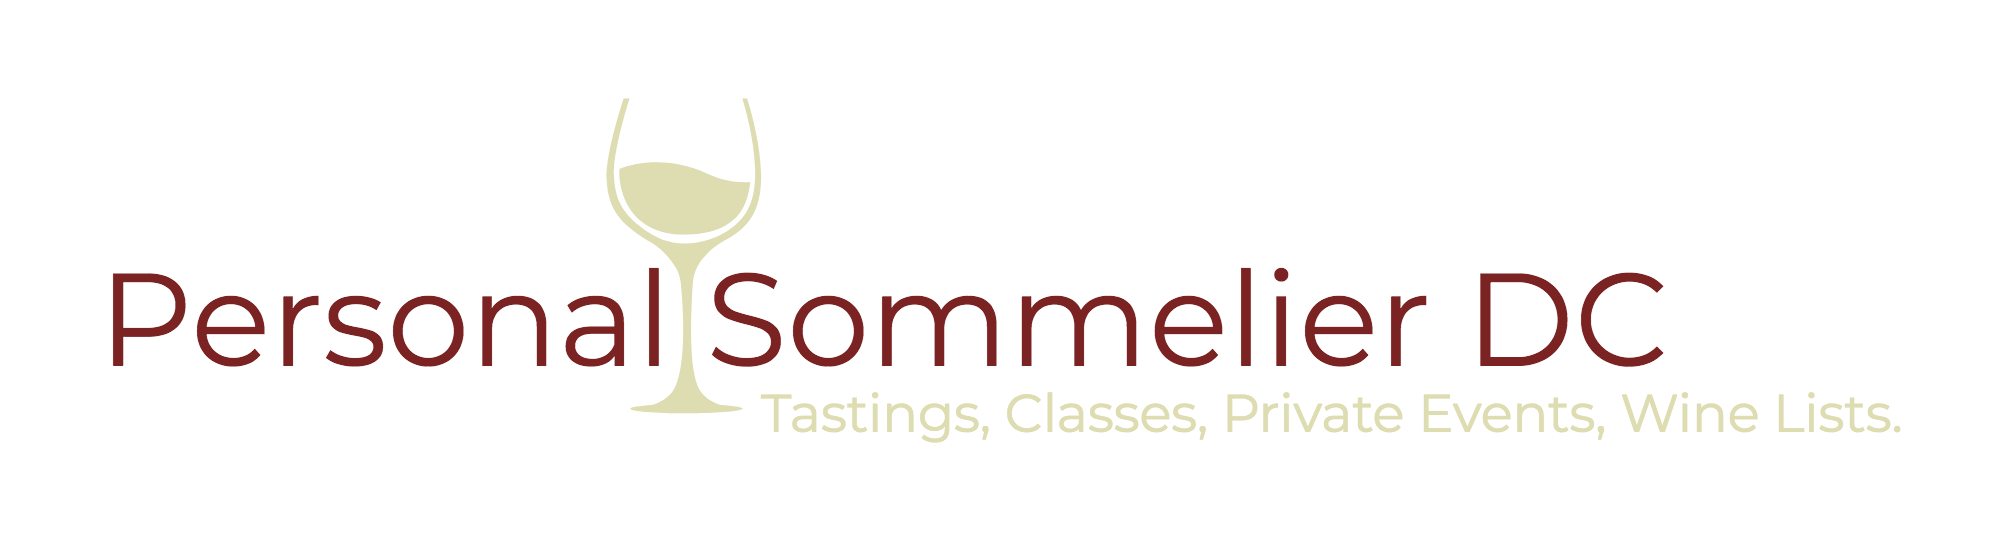 Personal Sommelier DC